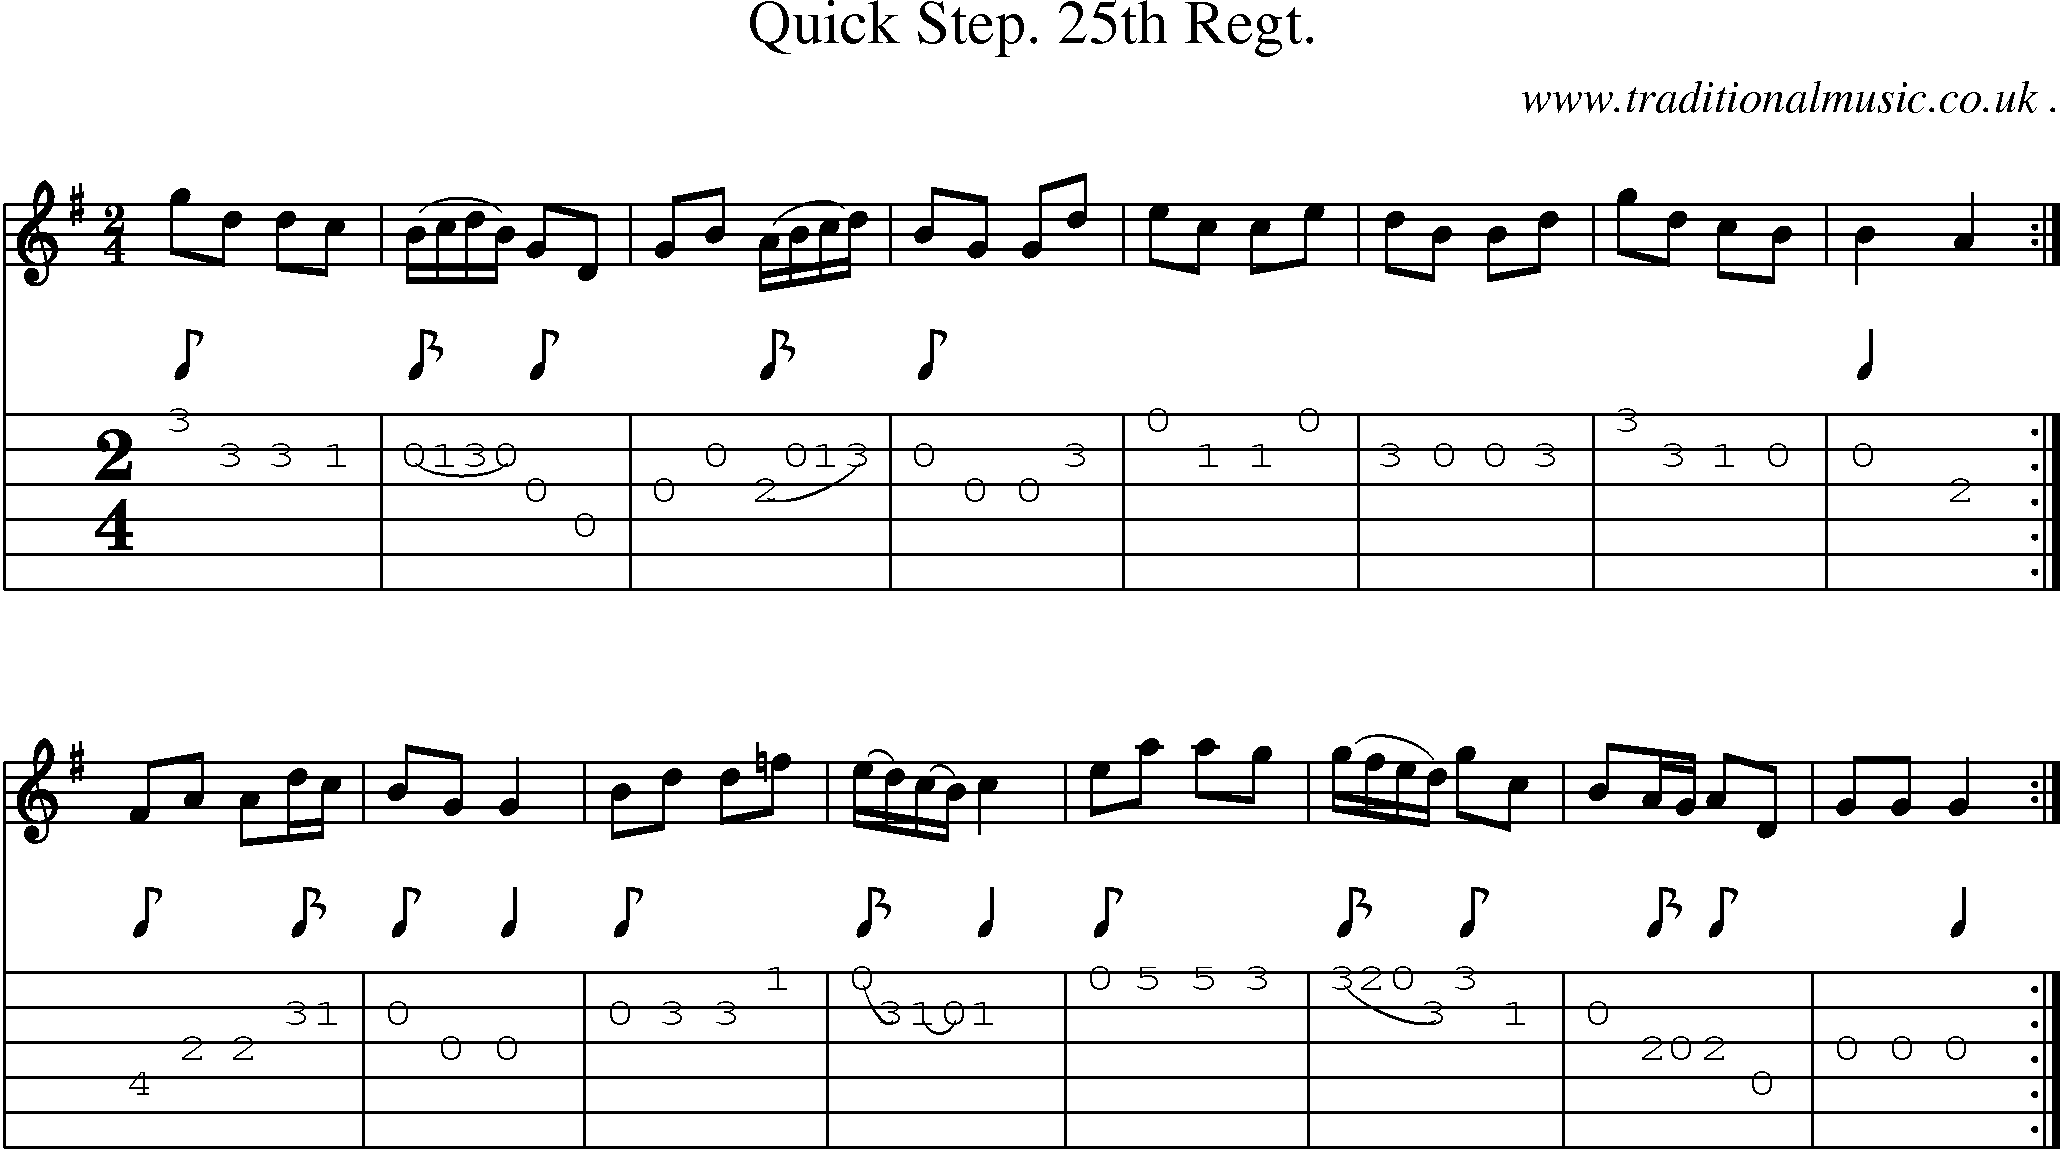 Sheet-Music and Guitar Tabs for Quick Step 25th Regt